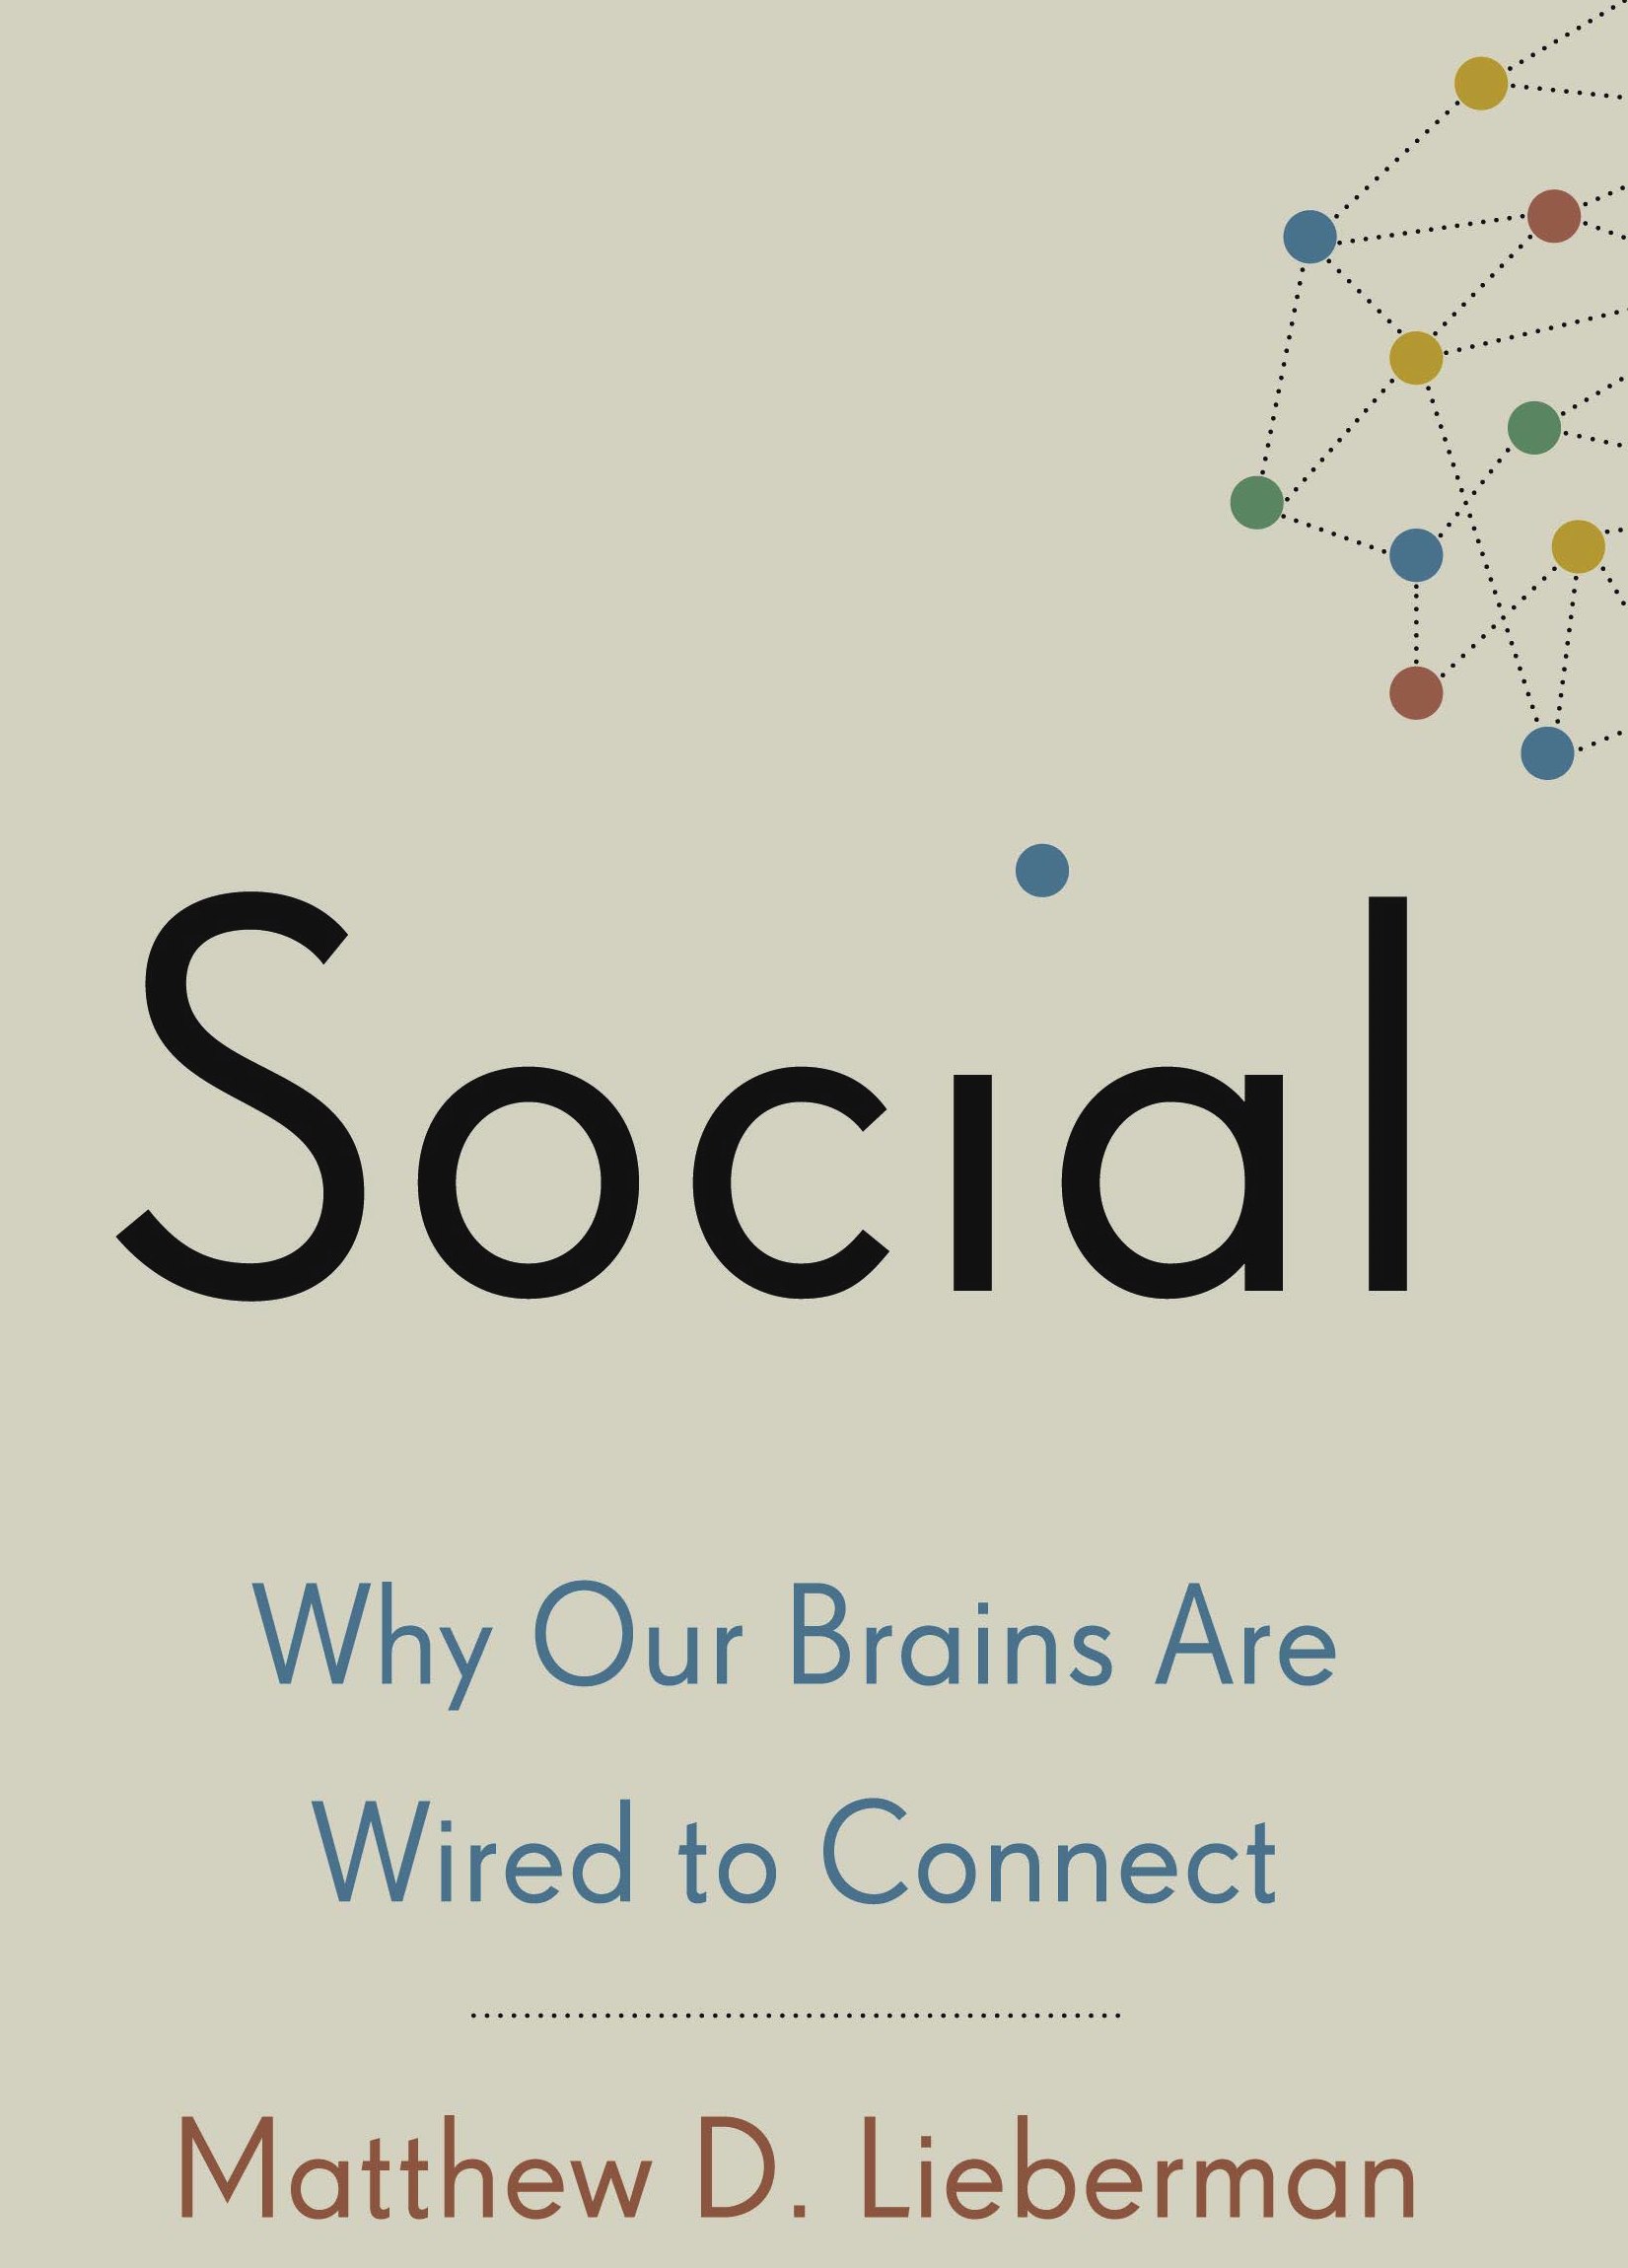 Cover image of the book 'Social: Why Our Brains Are Wired to Connect,' by Matthew D. Lieberman